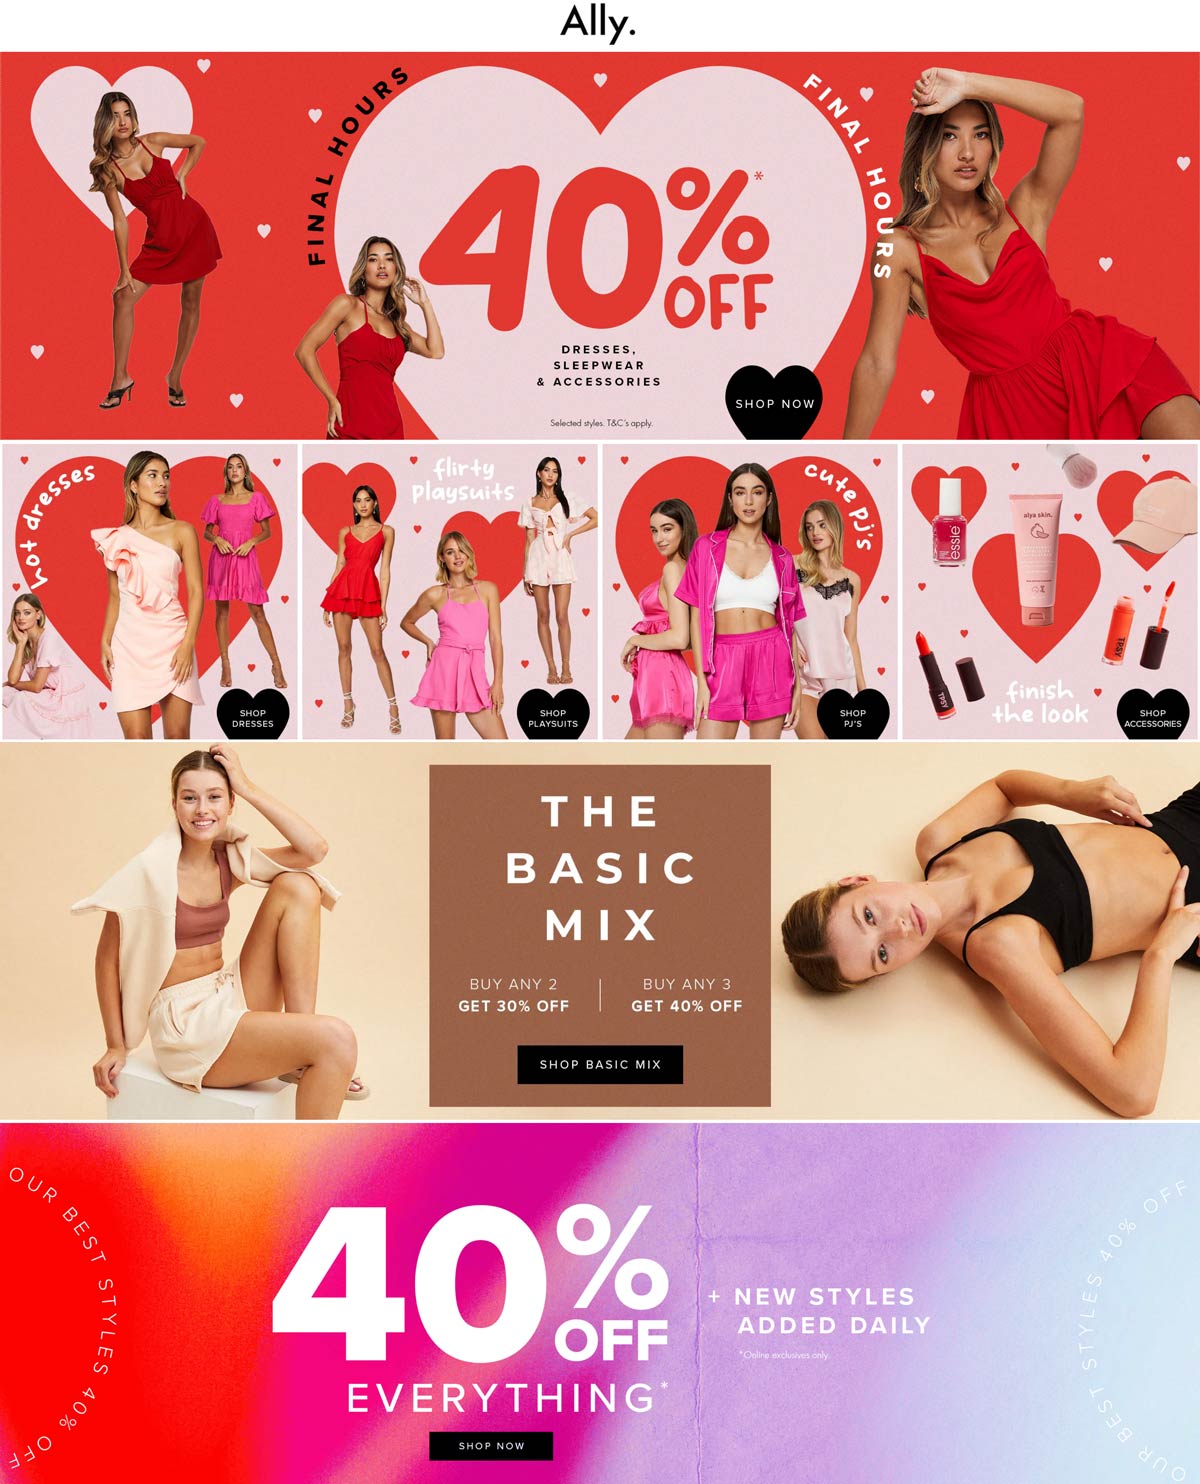 Ally stores Coupon  40% off everything at Ally fashion #ally 